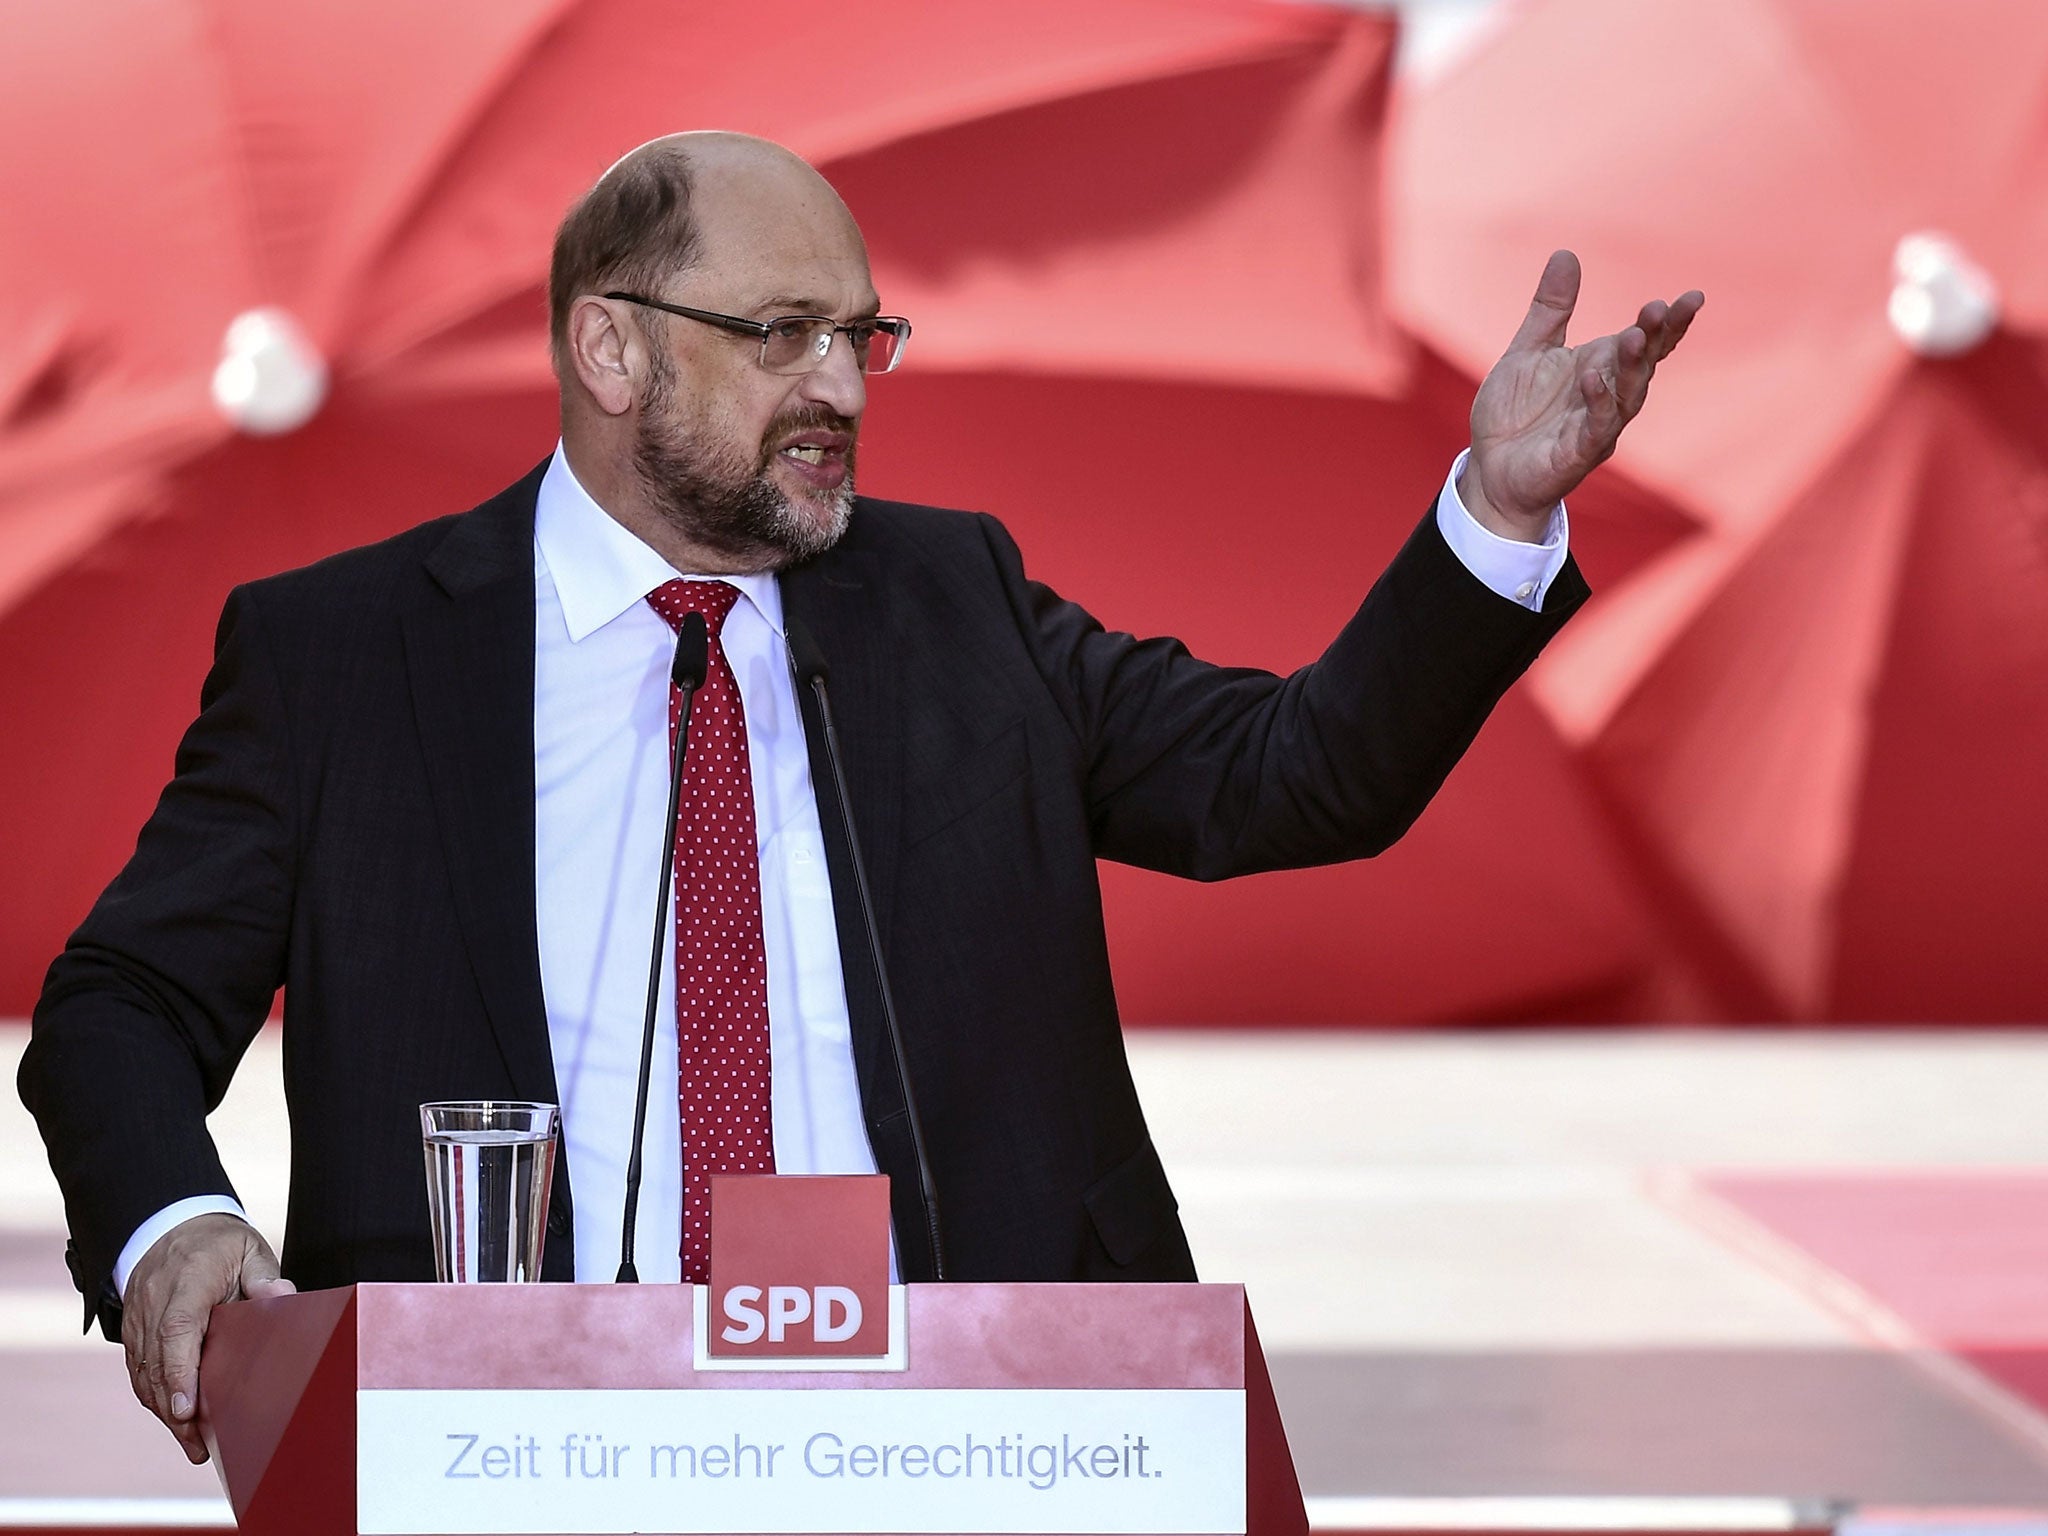 Martin Schulz, the leader of the German Social Democratic Party (SPD), at a campaign event in Nuremberg, Germany